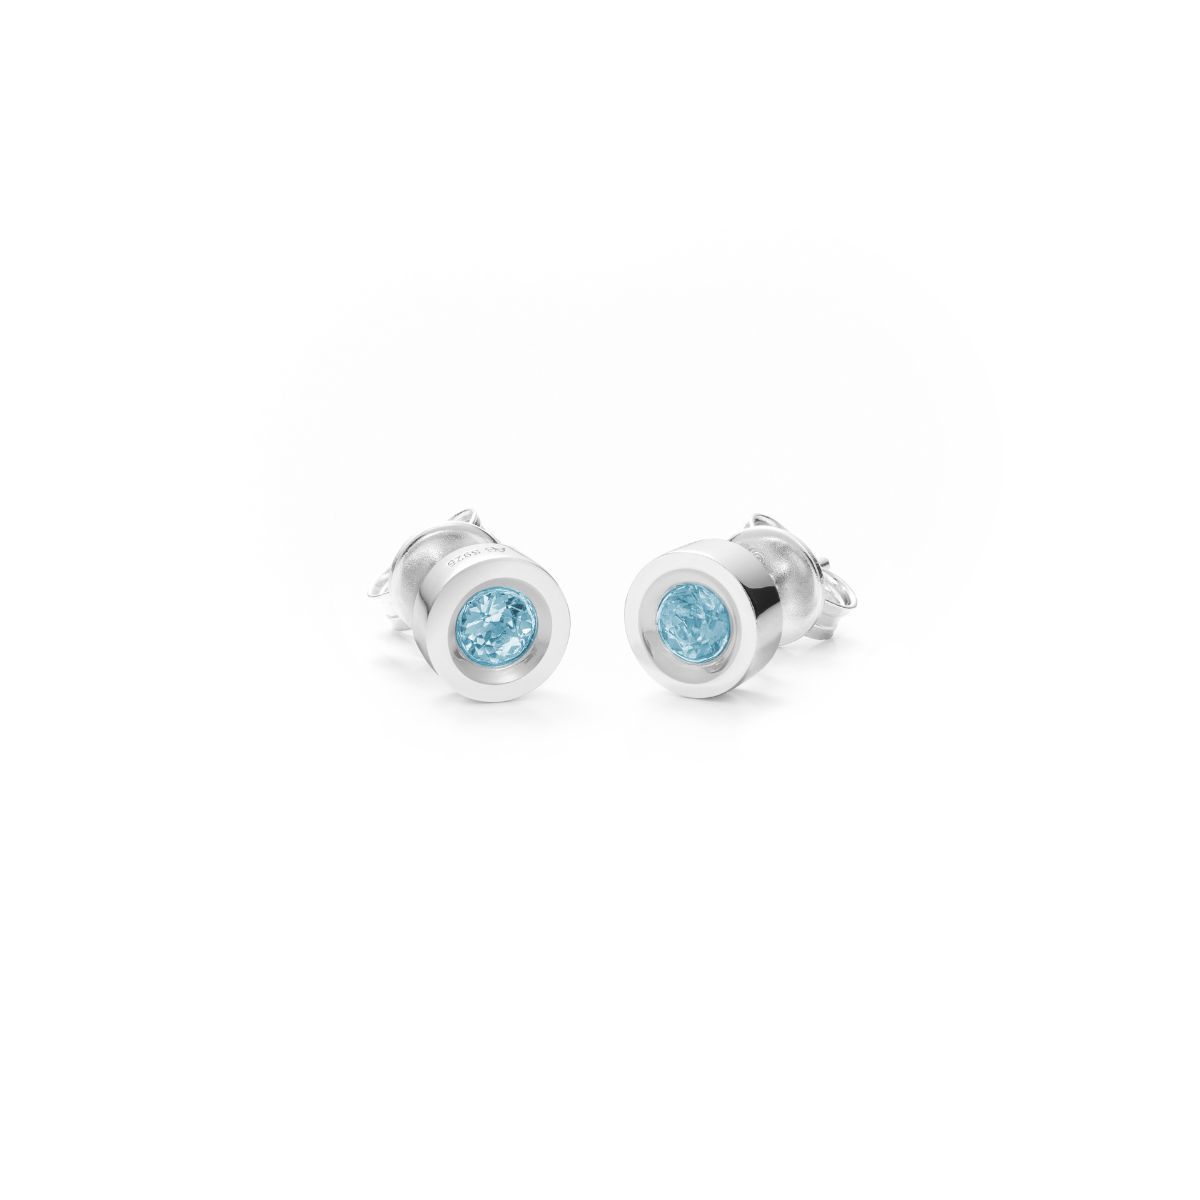 SMALL SILVER AND NATURAL BLUE TOPAZ EARRINGS